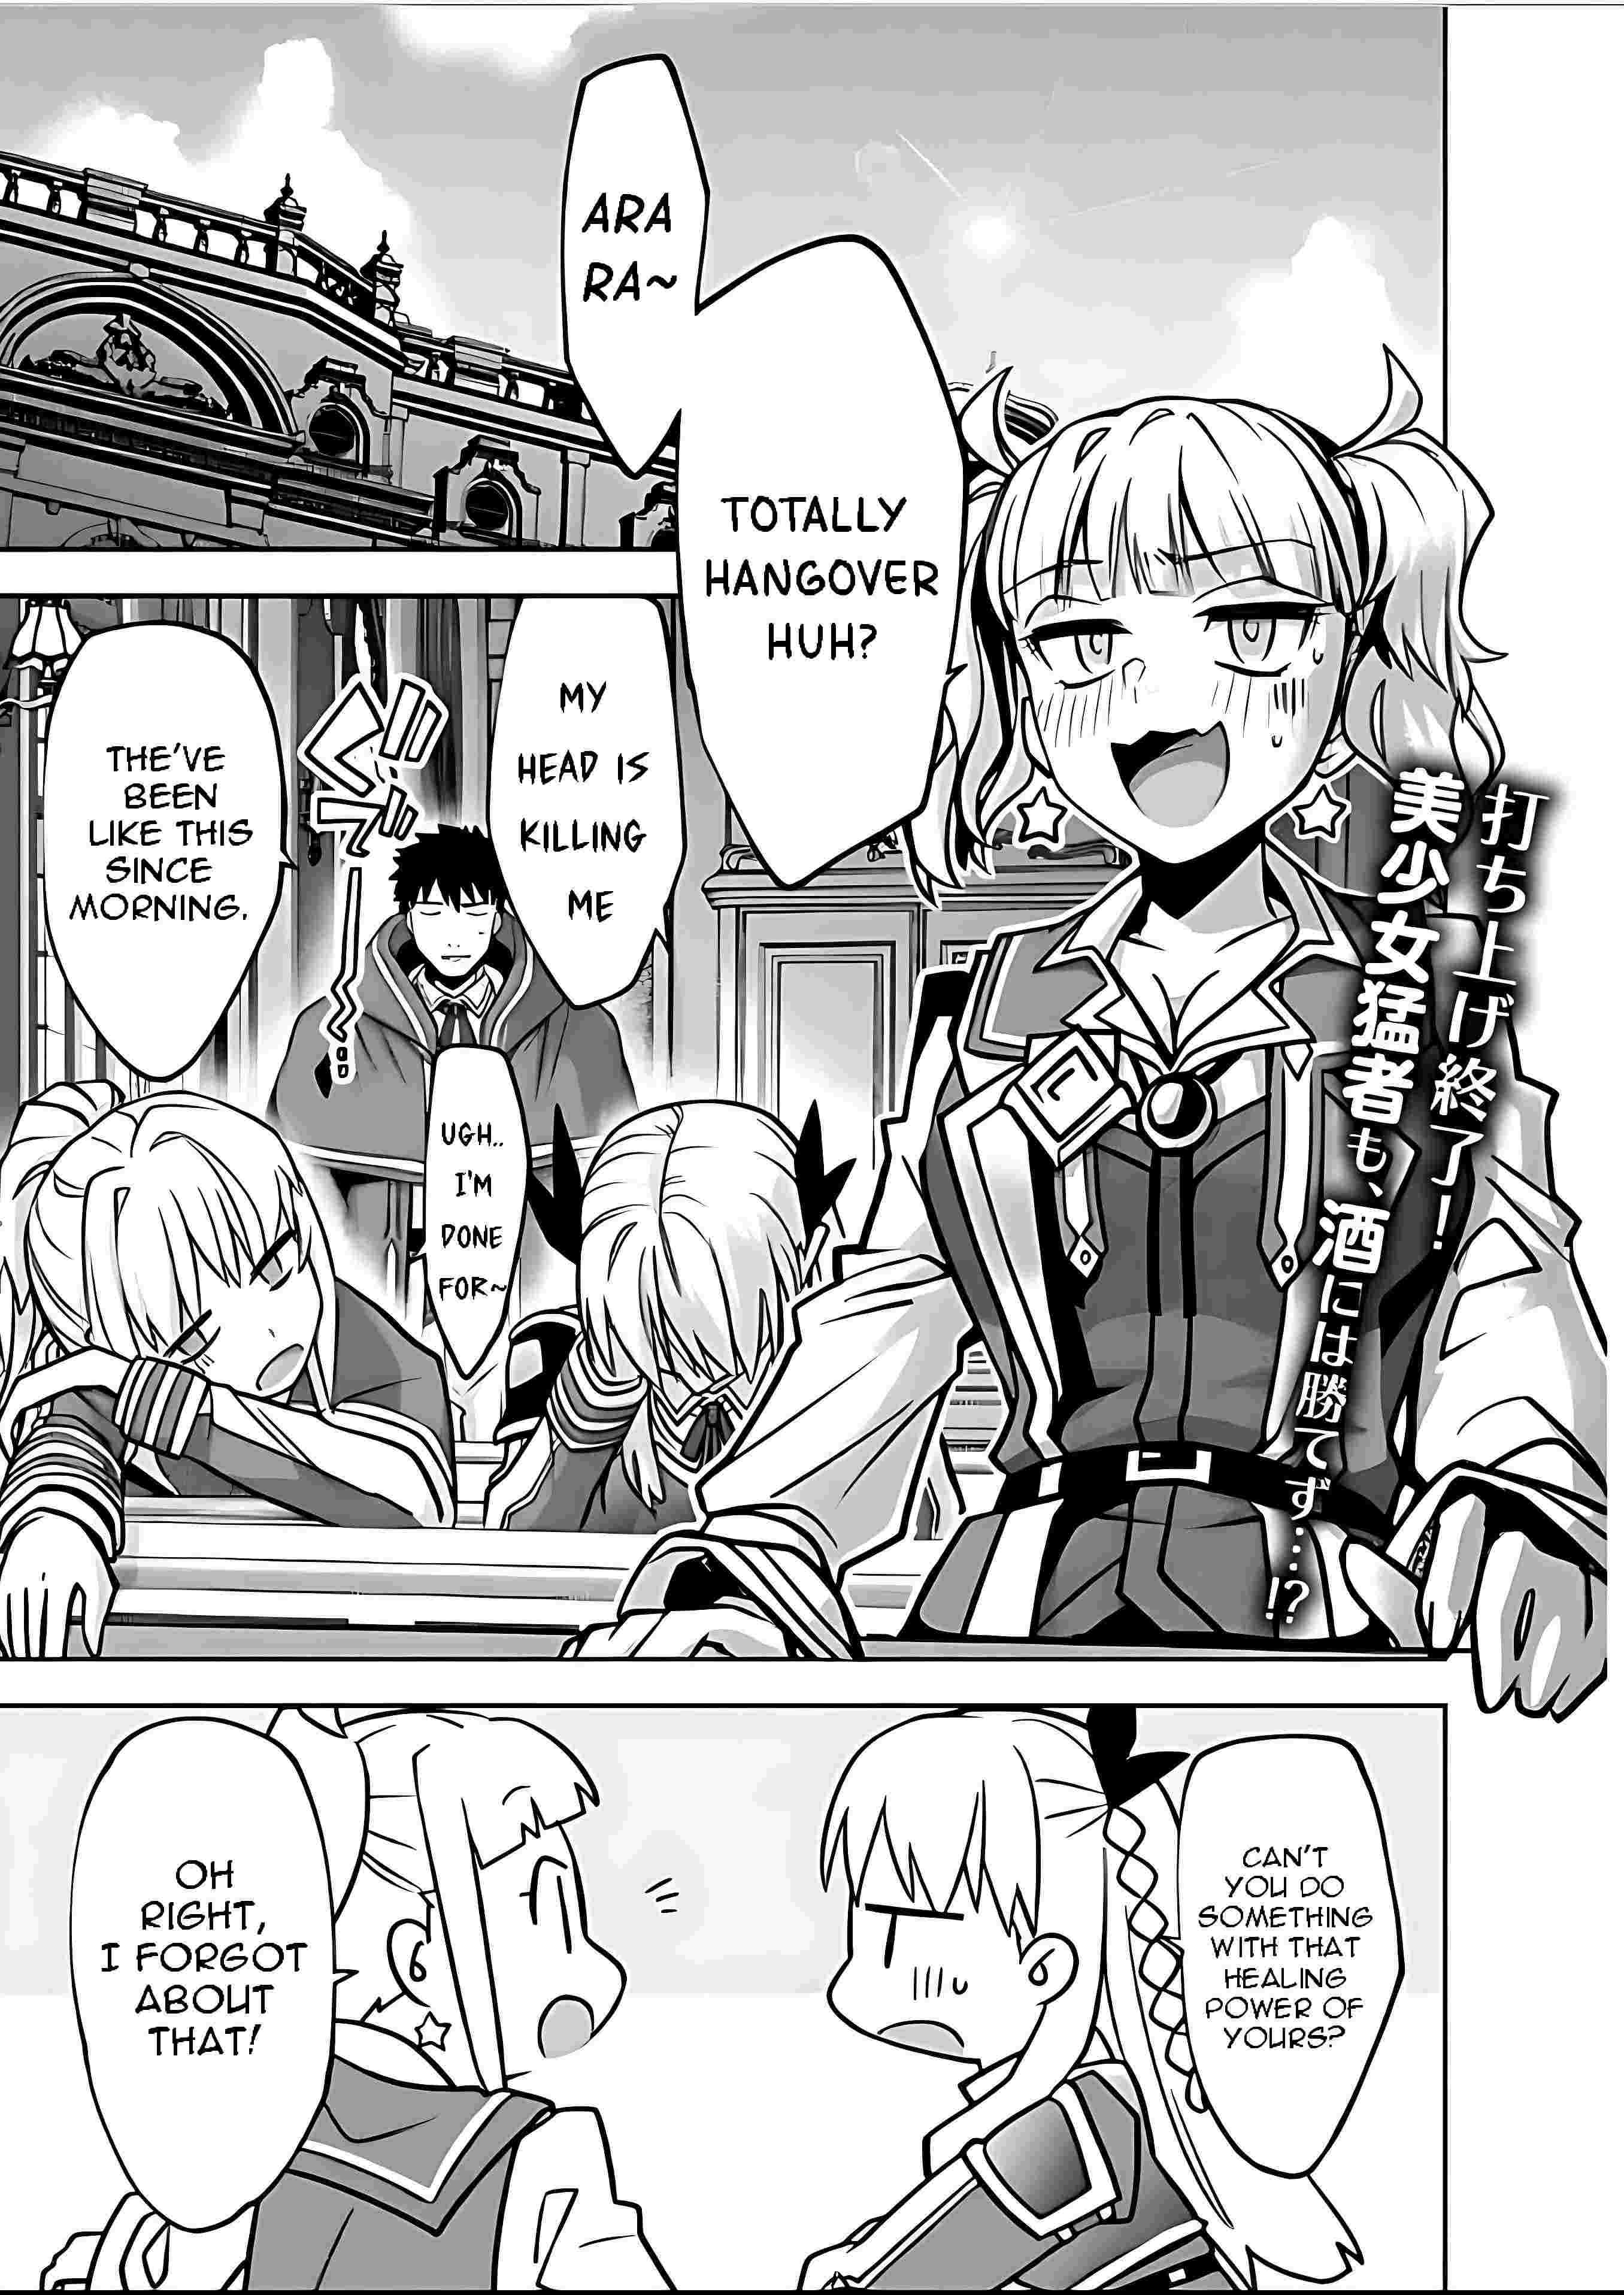 The Reincarnated Swordsman With 9999 Strength Wants To Become A Magician! - Page 3